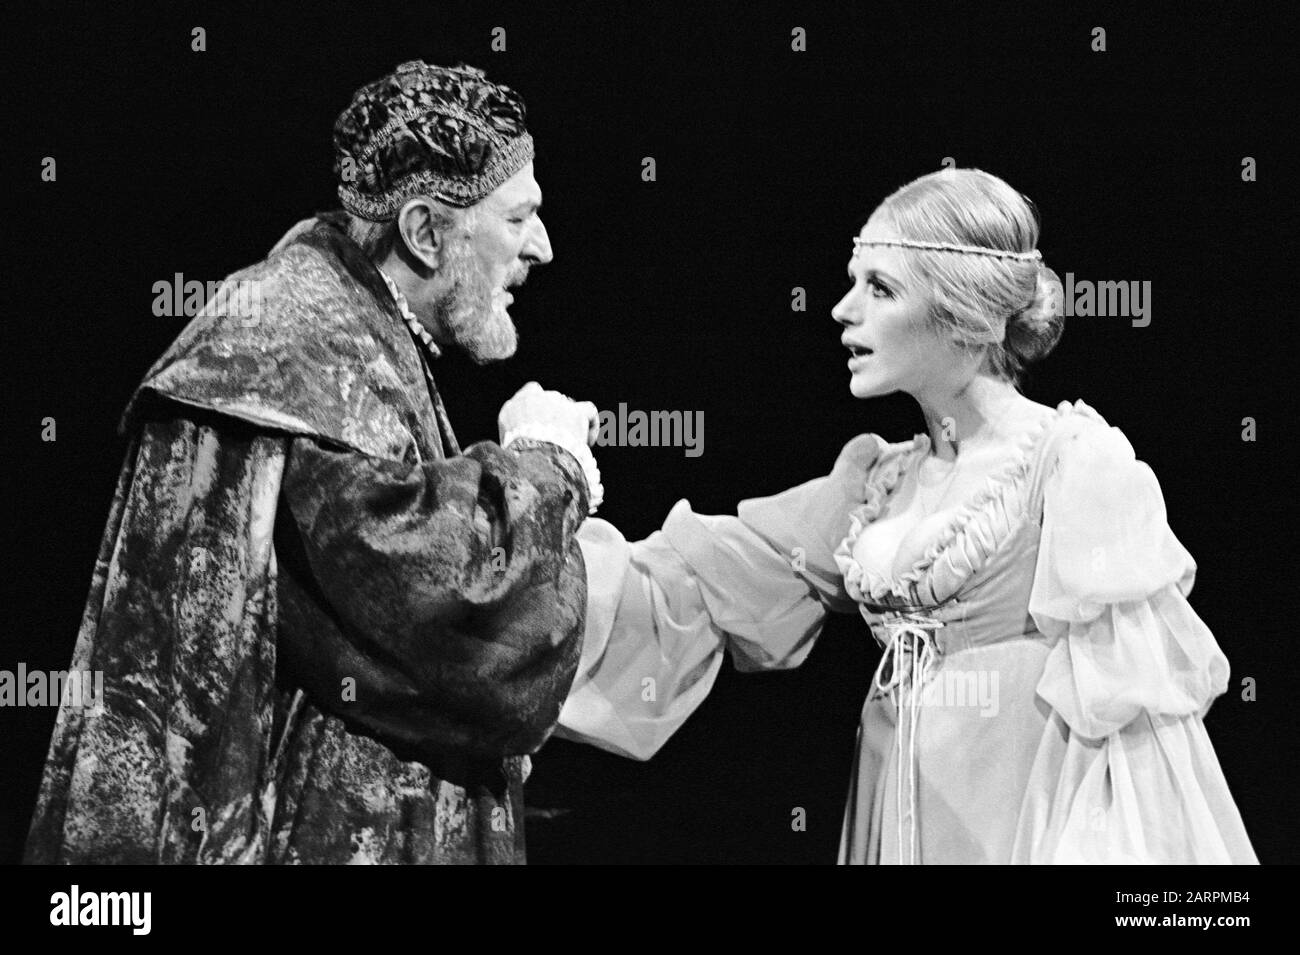 Marianne Faithfull as Ophelia, with Mark Dignam as Polonius, in HAMLET by Shakespeare directed by Tony Richardson at the Roundhouse, London in 1969. Marianne Faithfull, English singer, songwriter and actress, born 29 December 1946 in Hampstead, London.BW-010-8 Stock Photo